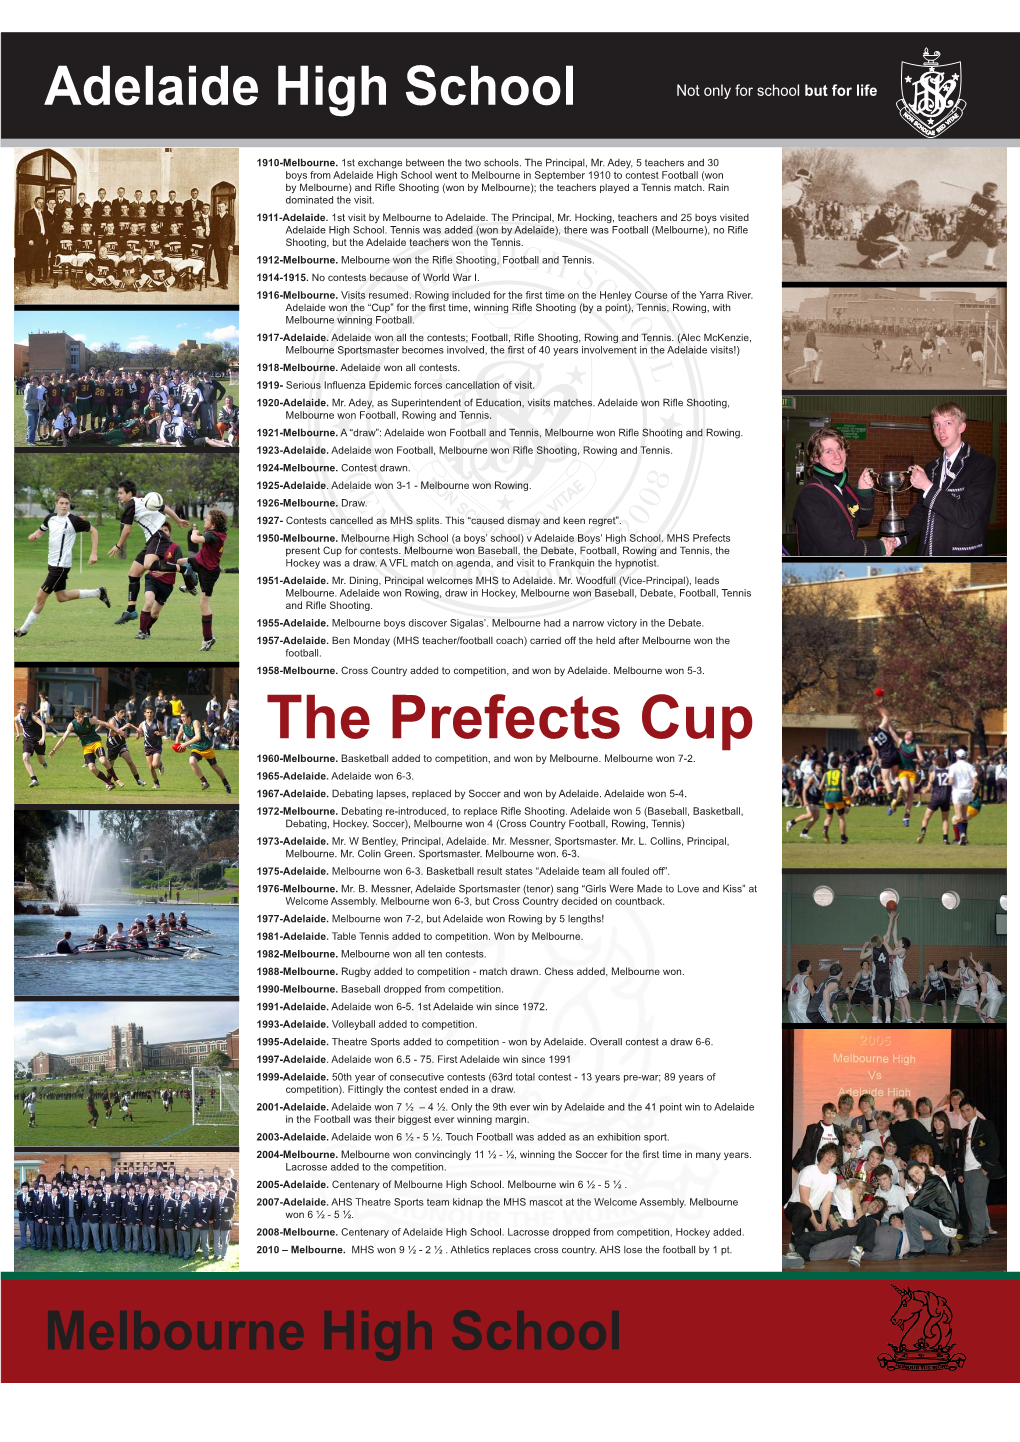 The Prefects Cup 1960-Melbourne